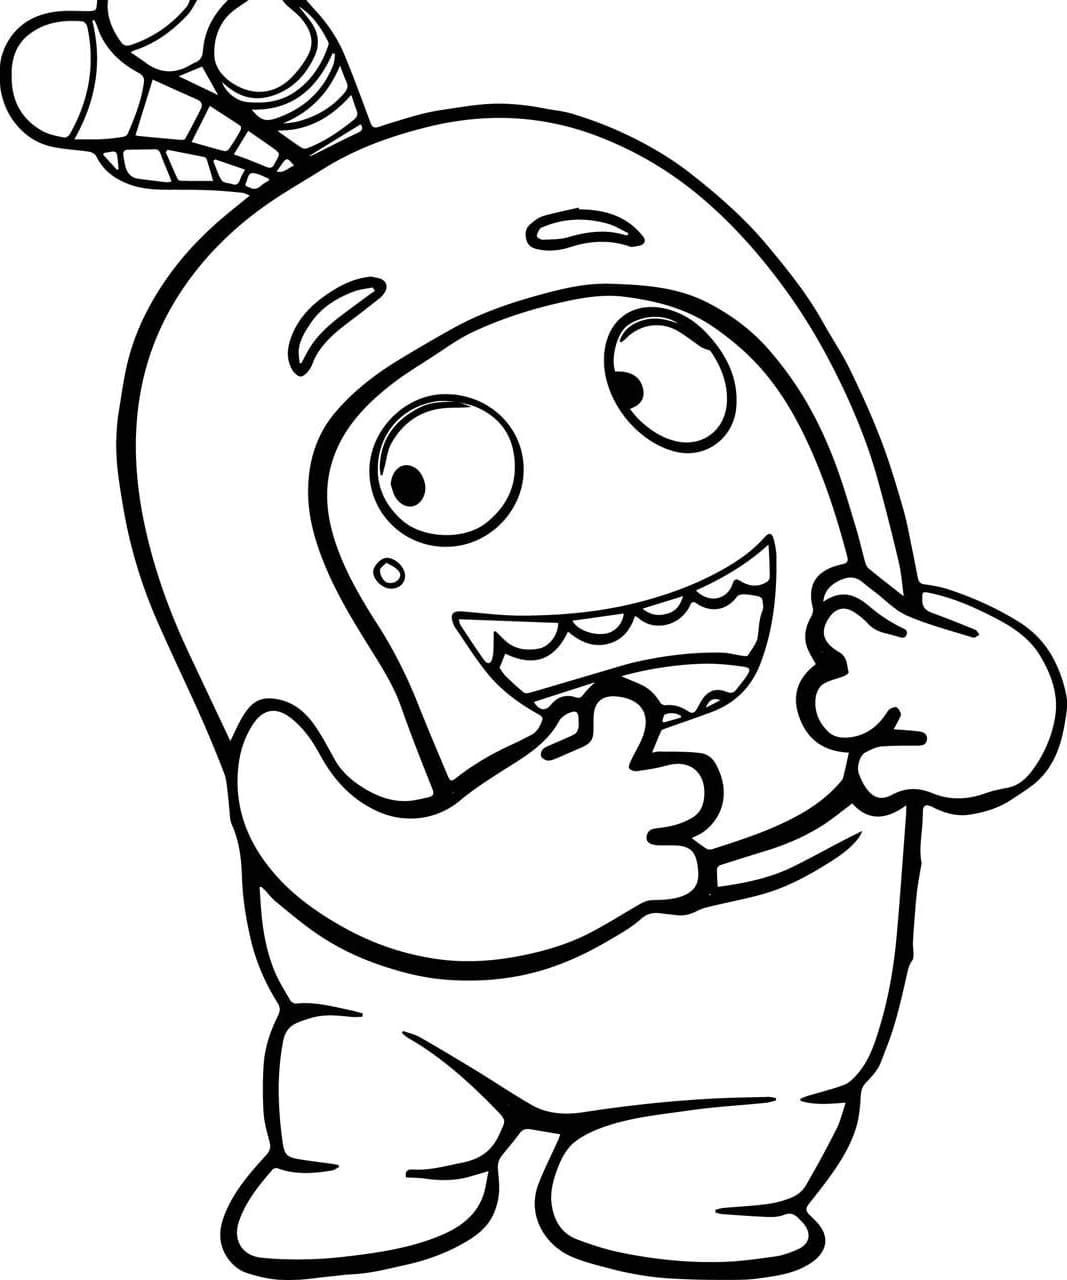 Oddbods coloring pages - Free coloring pages for Kids